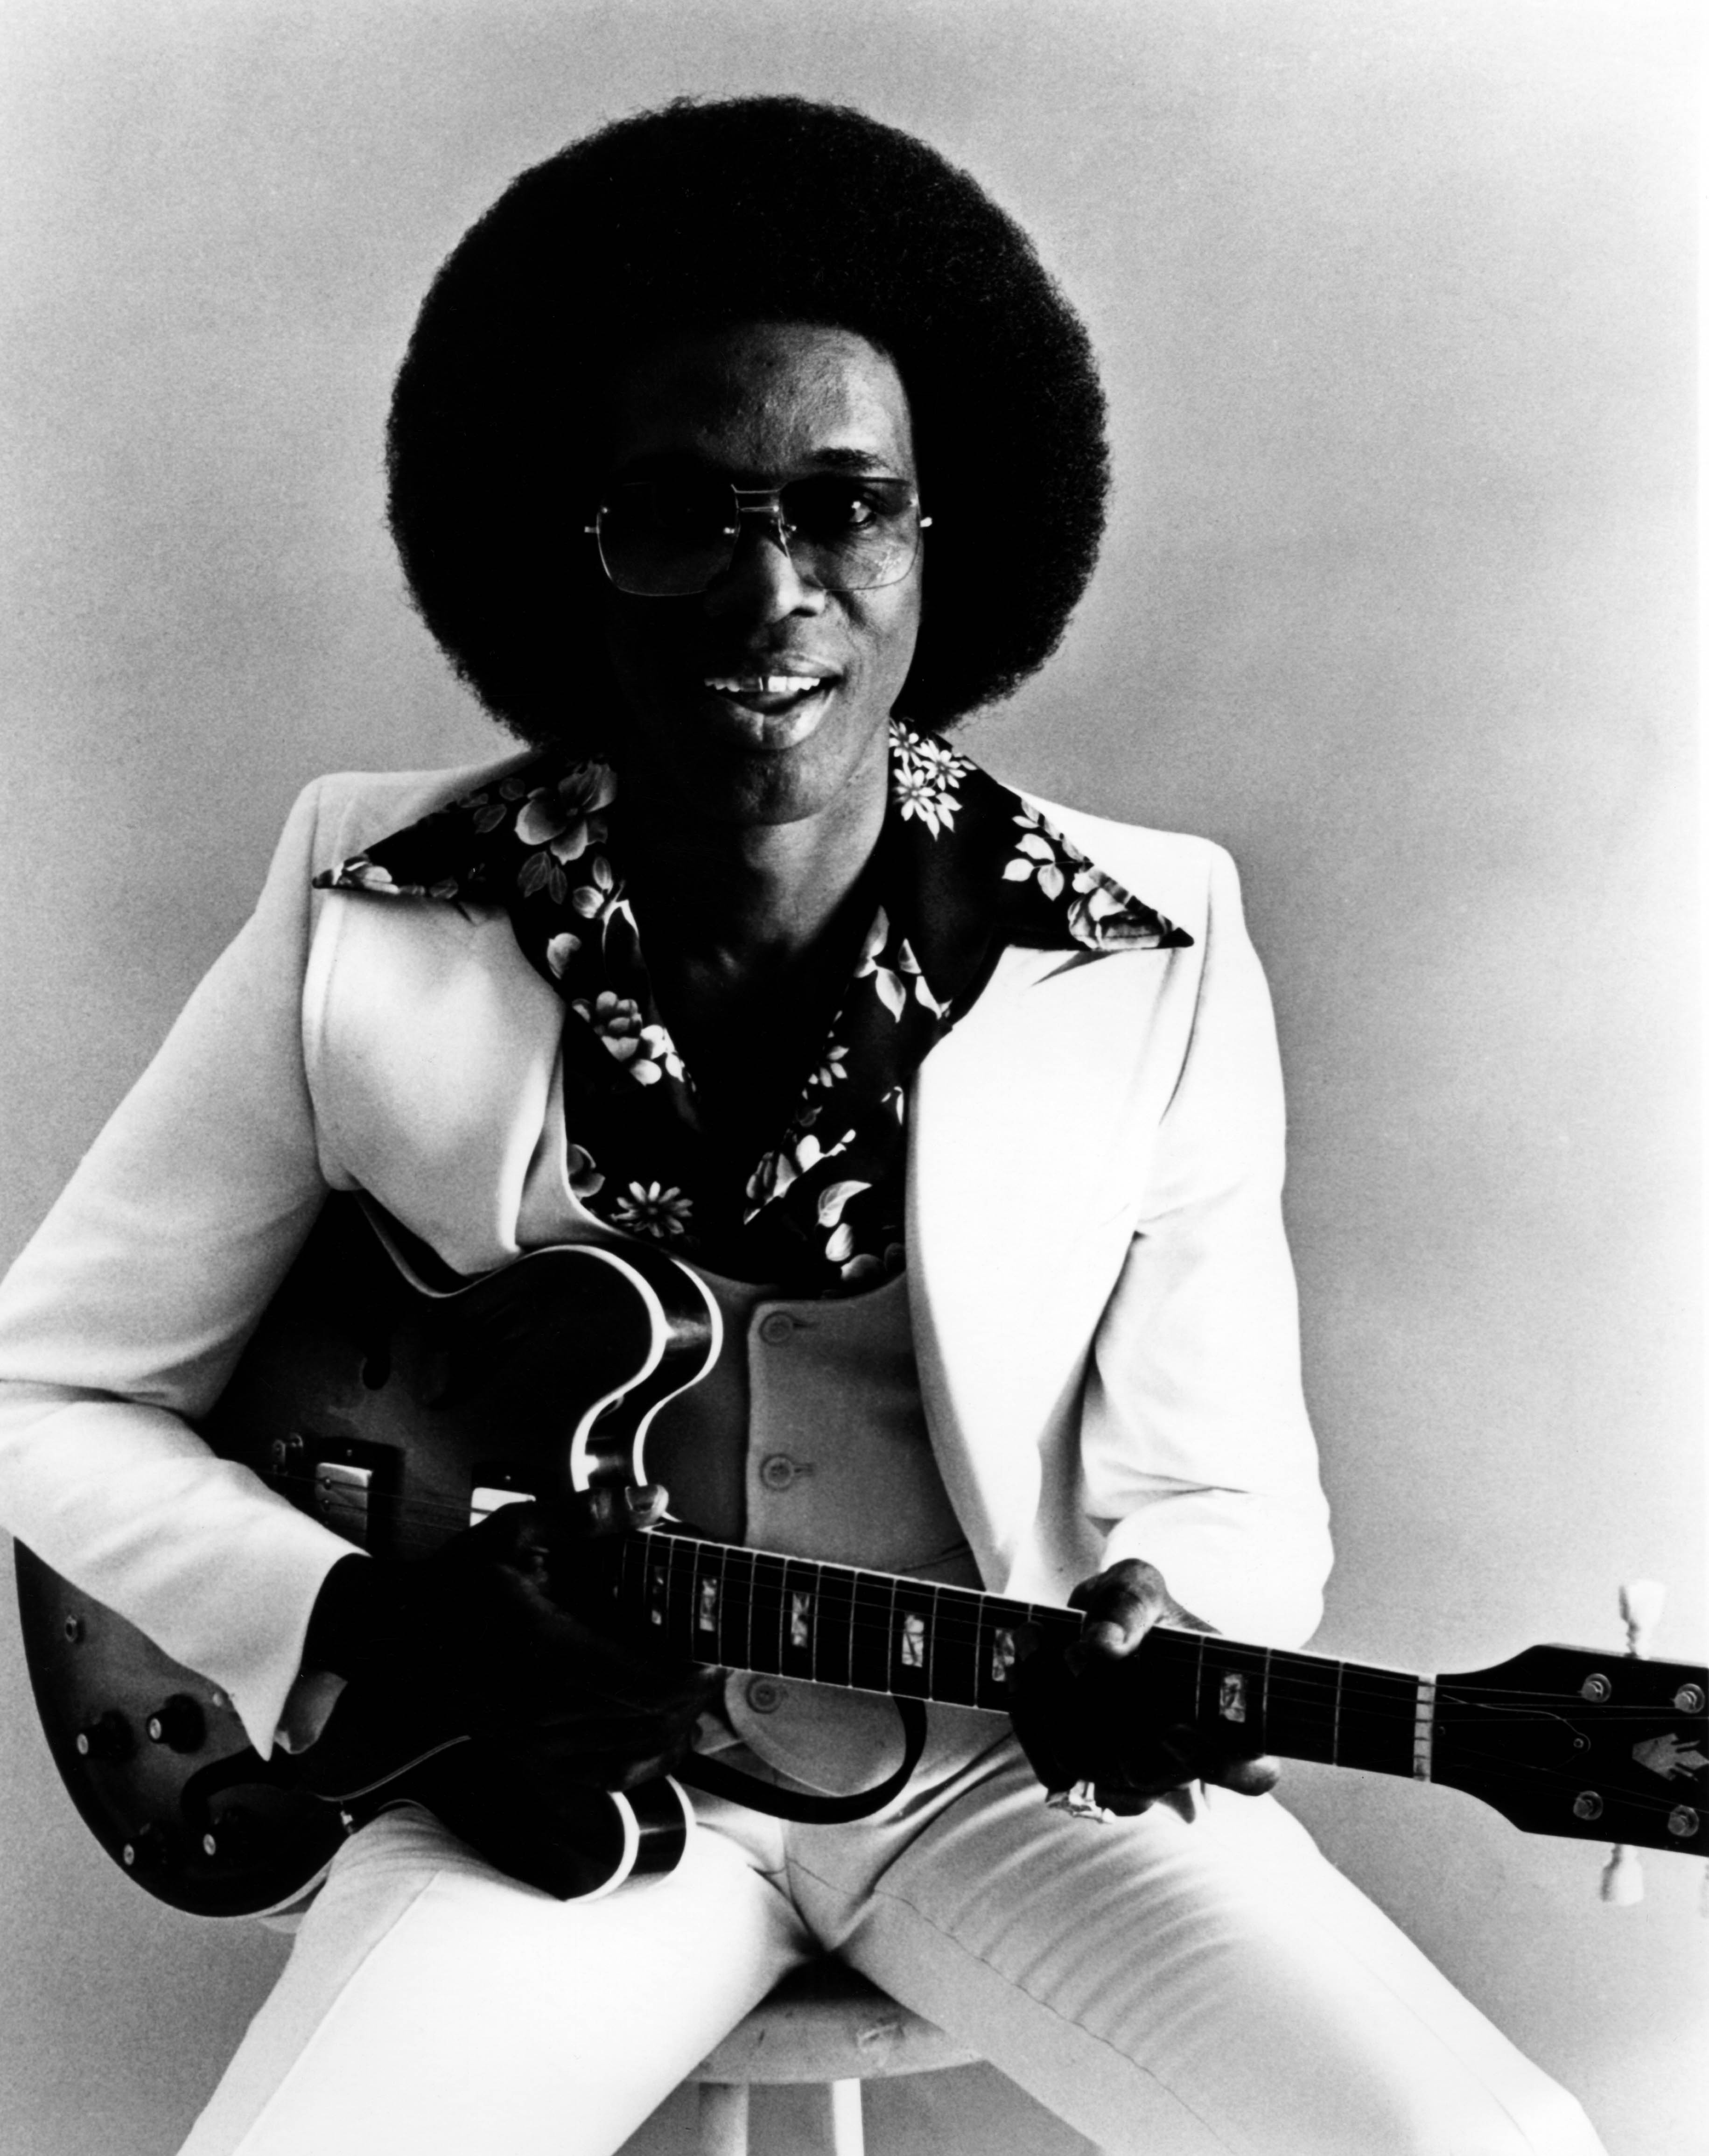 Portrait of Johnny "Guitar" Watson circa 1970 | Source: Getty Images